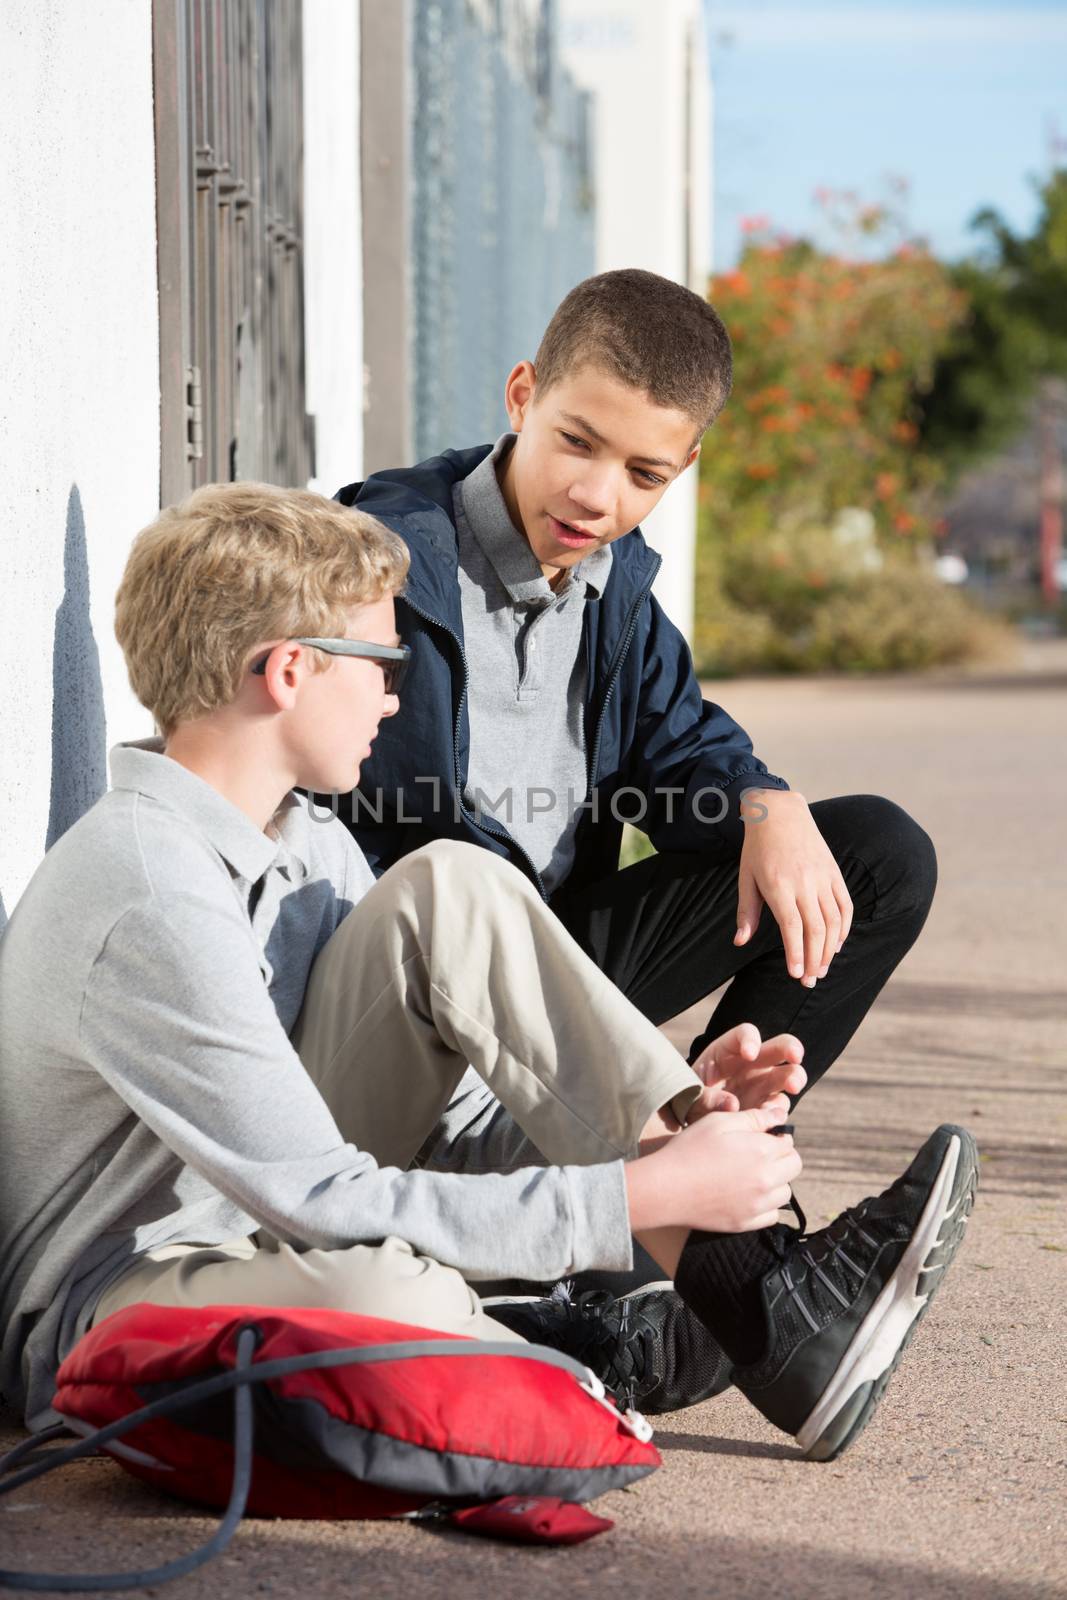 Two male teenage students hanging out at side of wall talking. Backpack on ground.